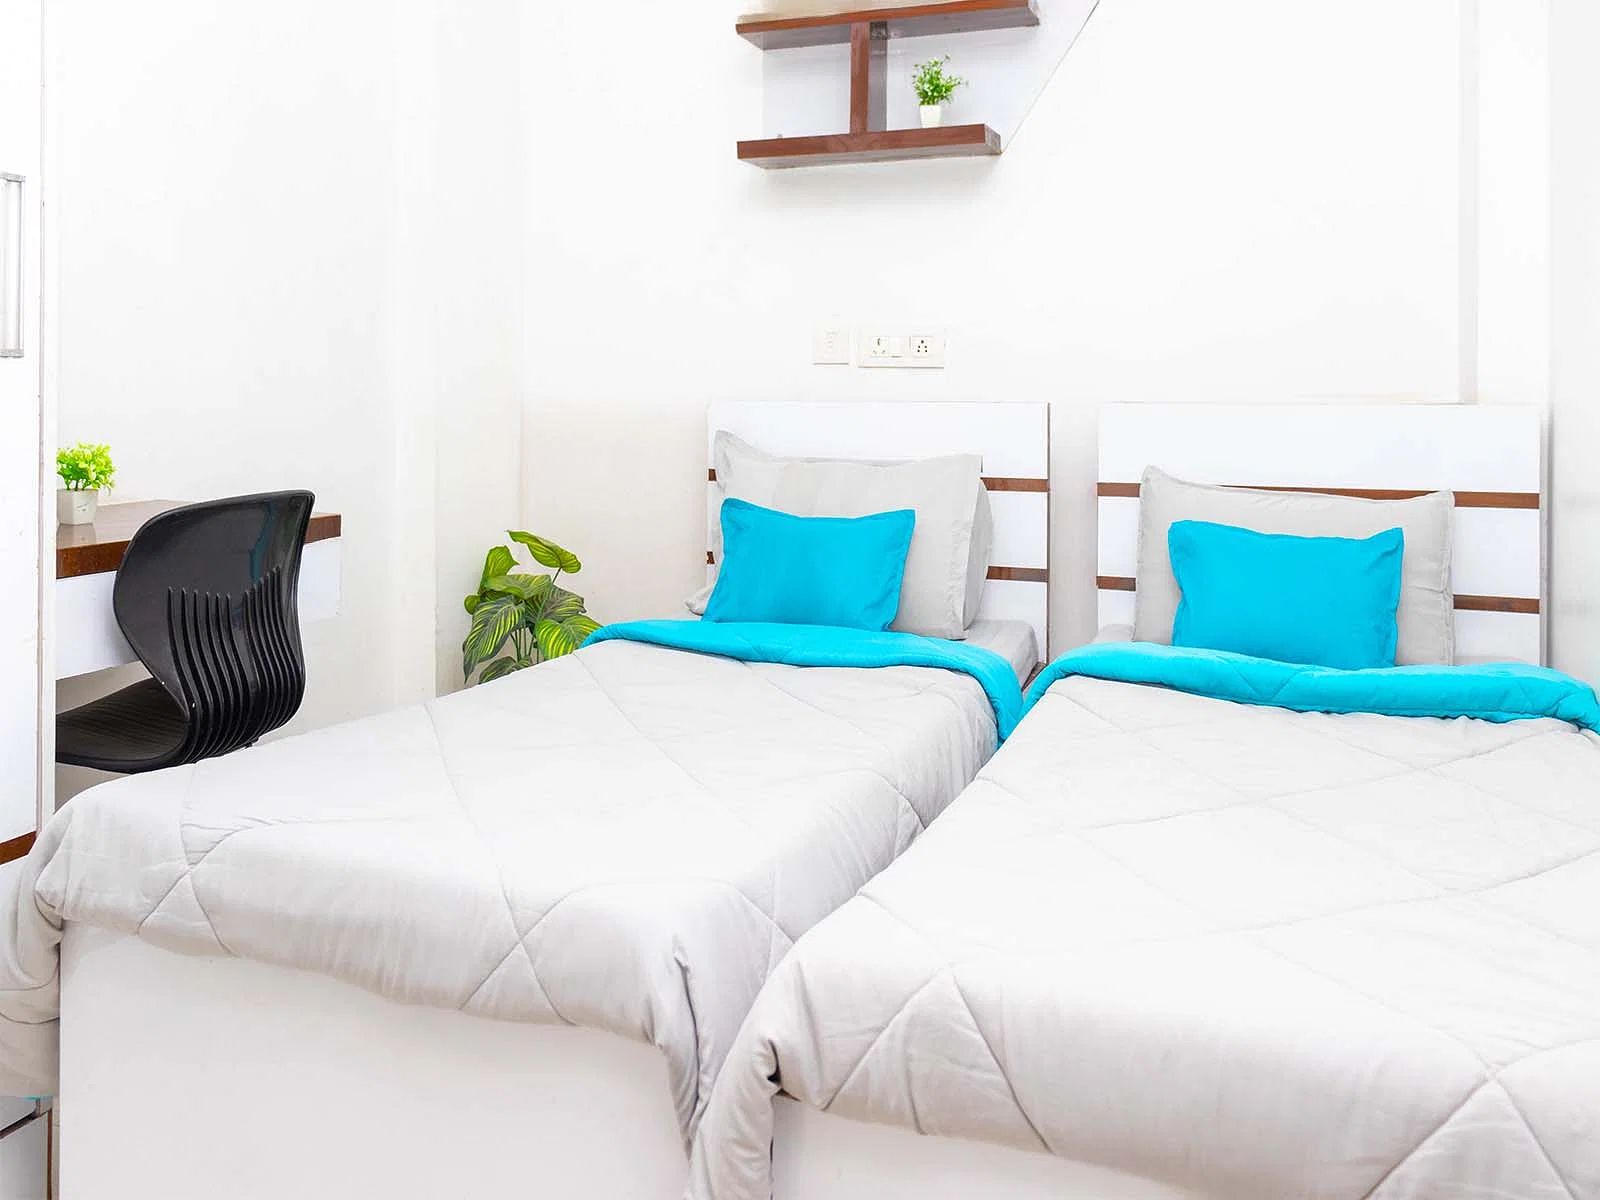 safe and affordable hostels for couple students with 24/7 security and CCTV surveillance-Zolo Astrix